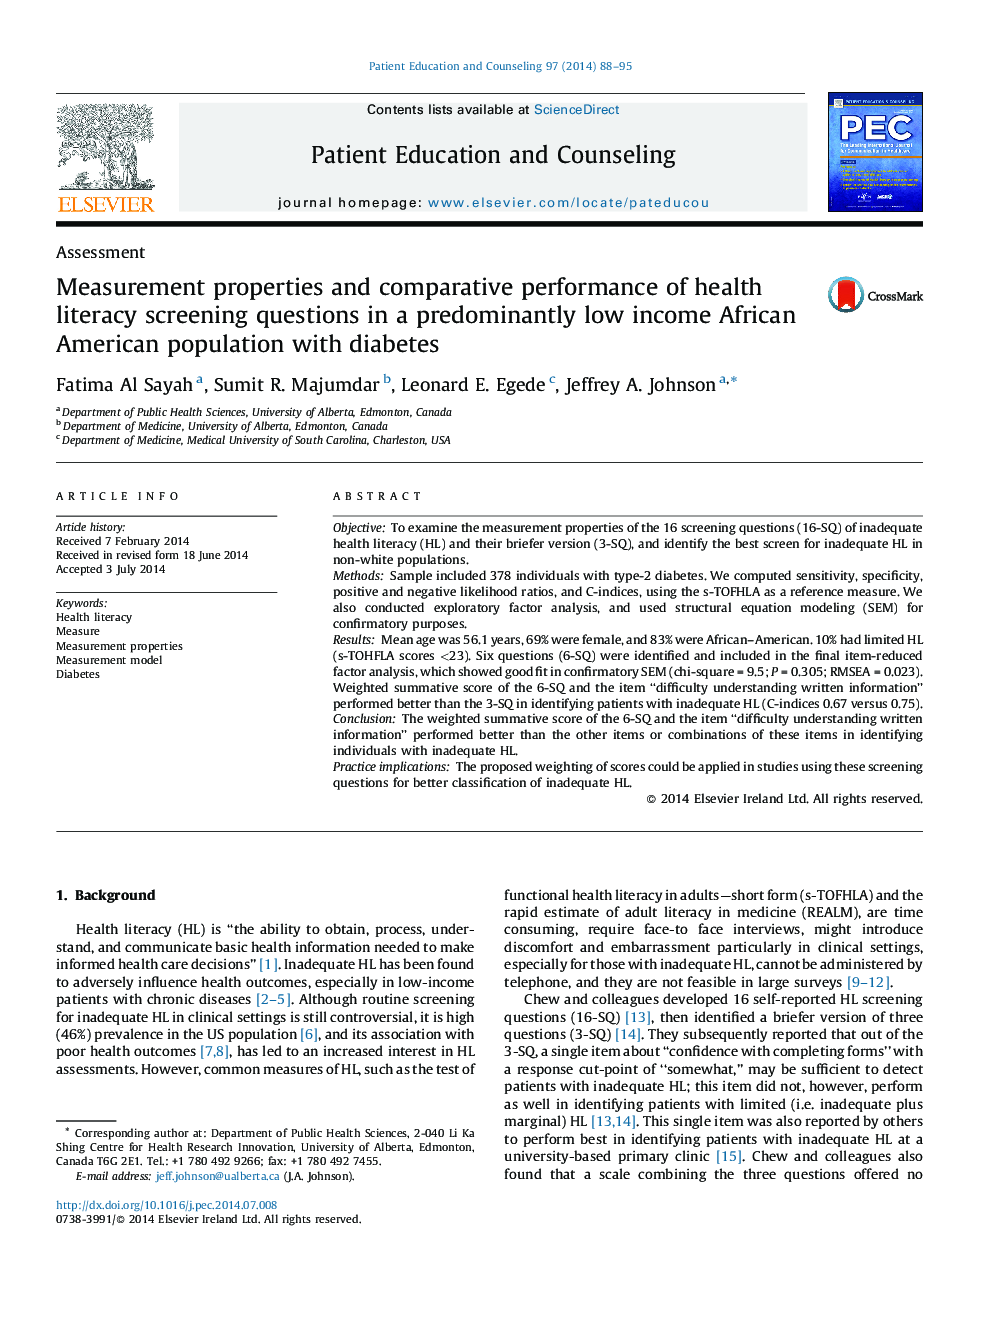 Measurement properties and comparative performance of health literacy screening questions in a predominantly low income African American population with diabetes